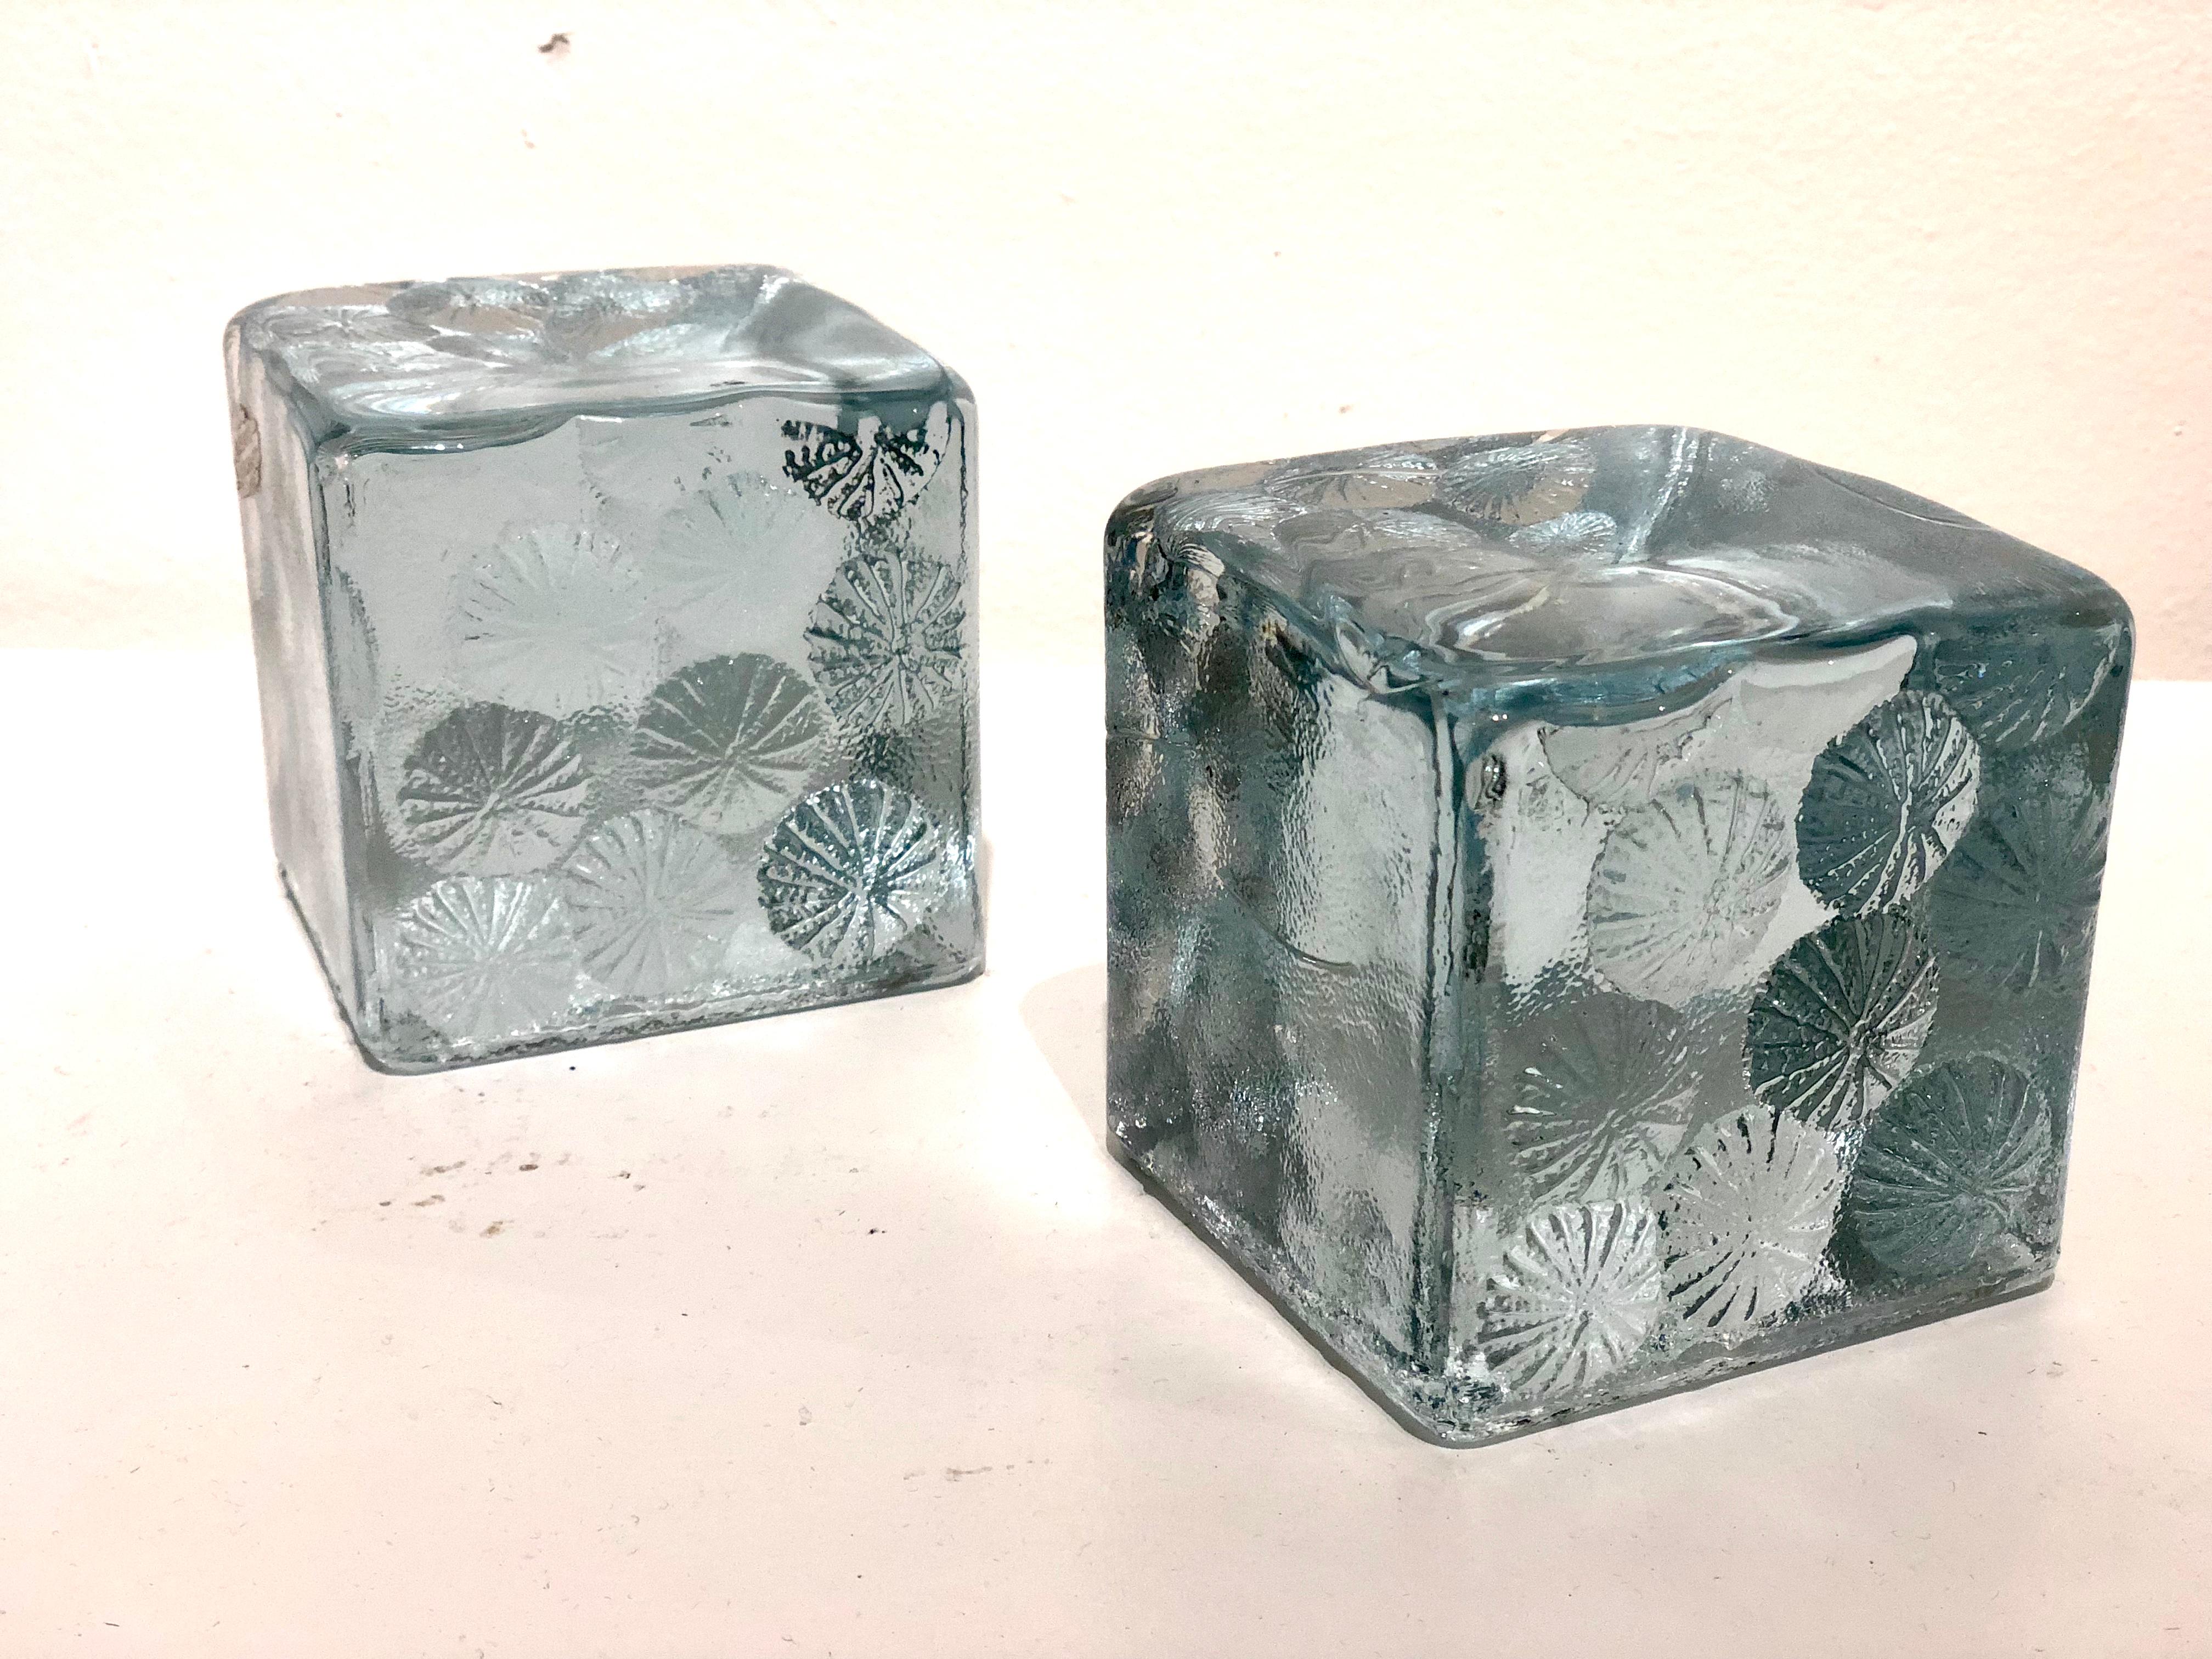 Nice pair of Blenko handcrafted cube bookends in clear glass with designs on the side.